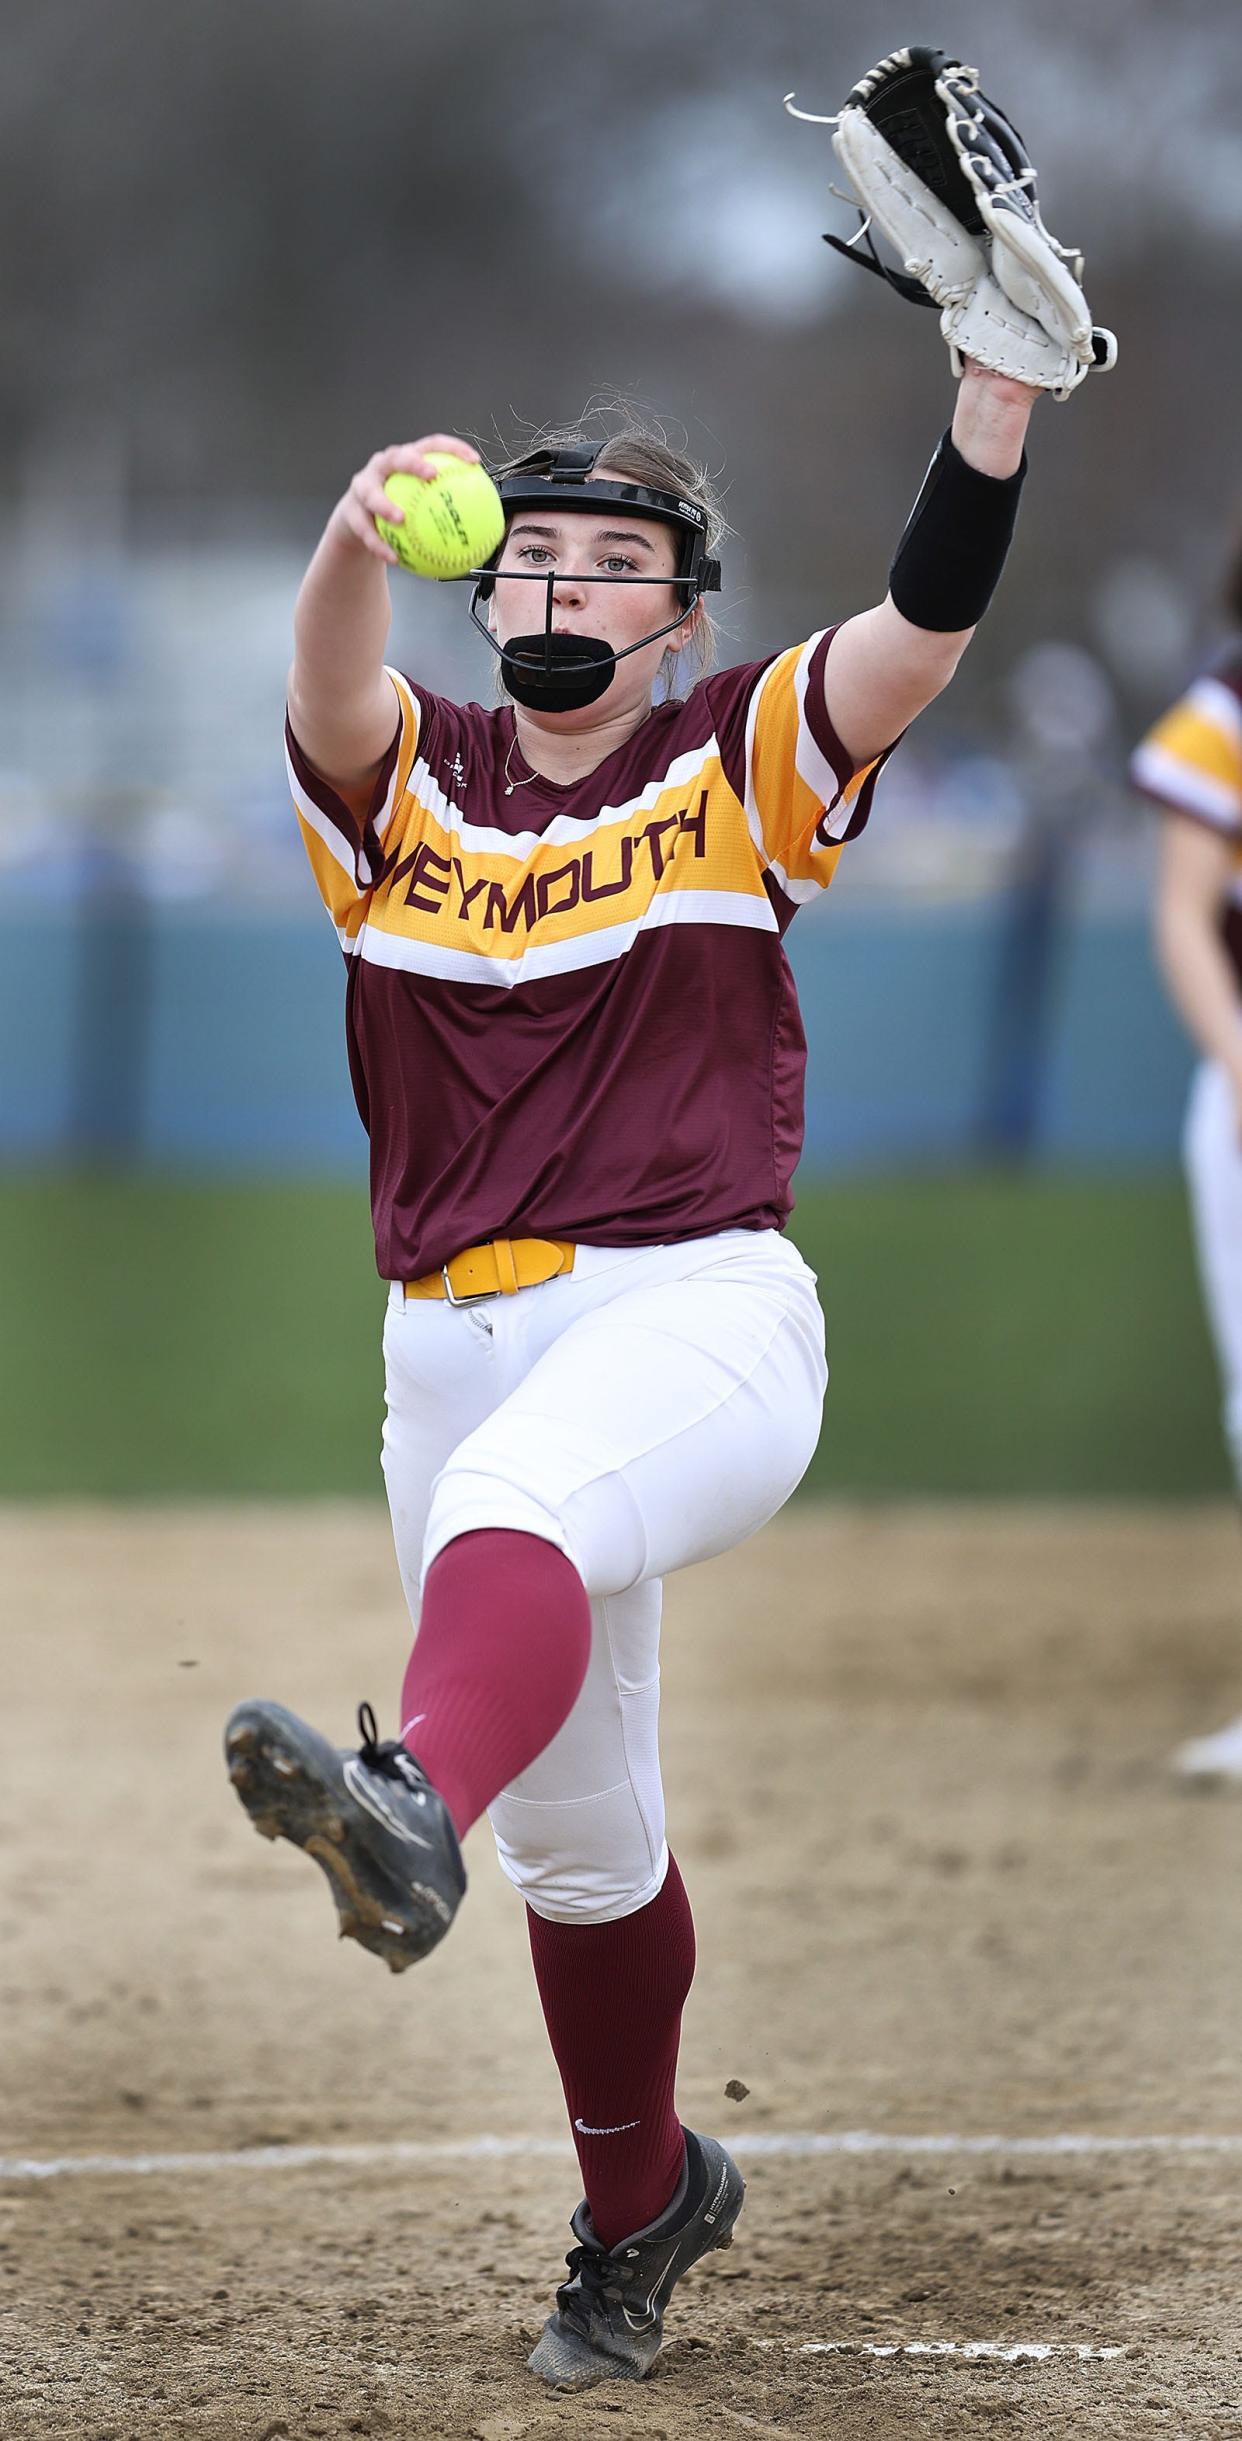 Weymouth starting pitcher Maddie Smith pitches in the first inning.
The Braintree Wamps host the Weymouth Wildcats in softball at Braintree High on Wednesday April 10, 2024